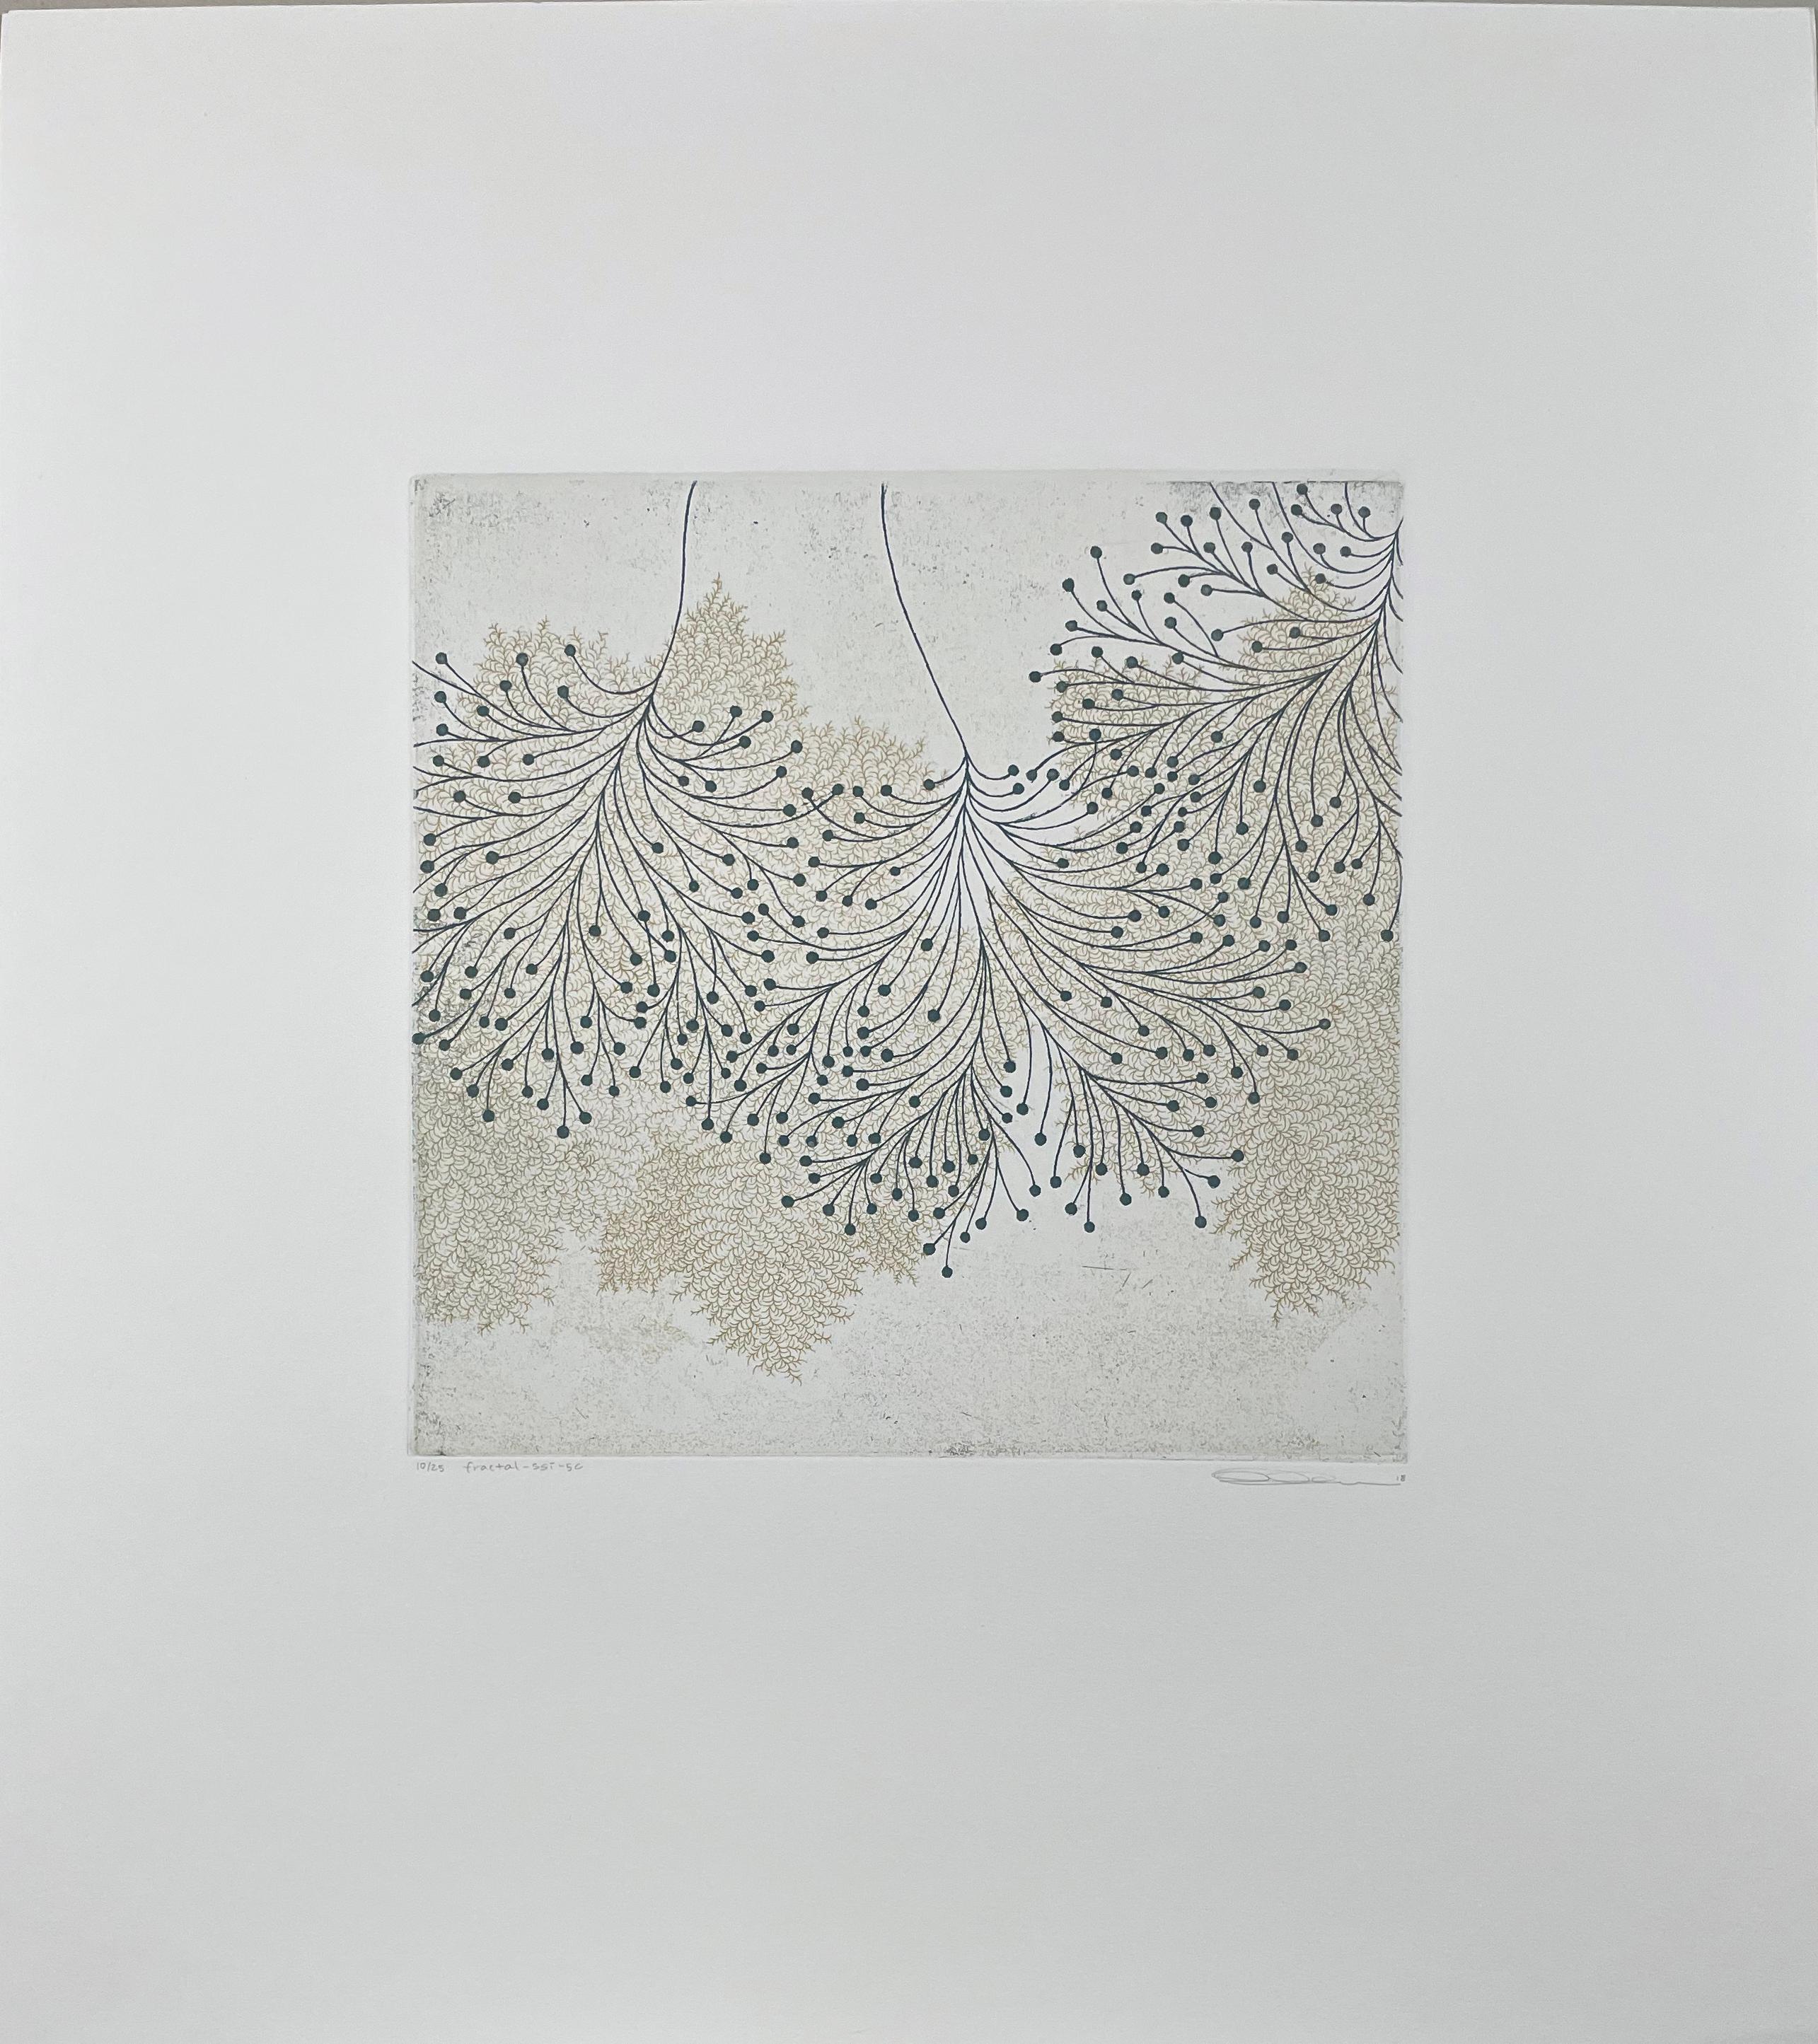 Carborundum and intaglio. Signed and numbered from the edition of 25. 

Tachibana’s prints take their inspiration from nature, a meditation on the forms and shapes of water, ferns and the basic elements of life. Fractals have become the focus of her